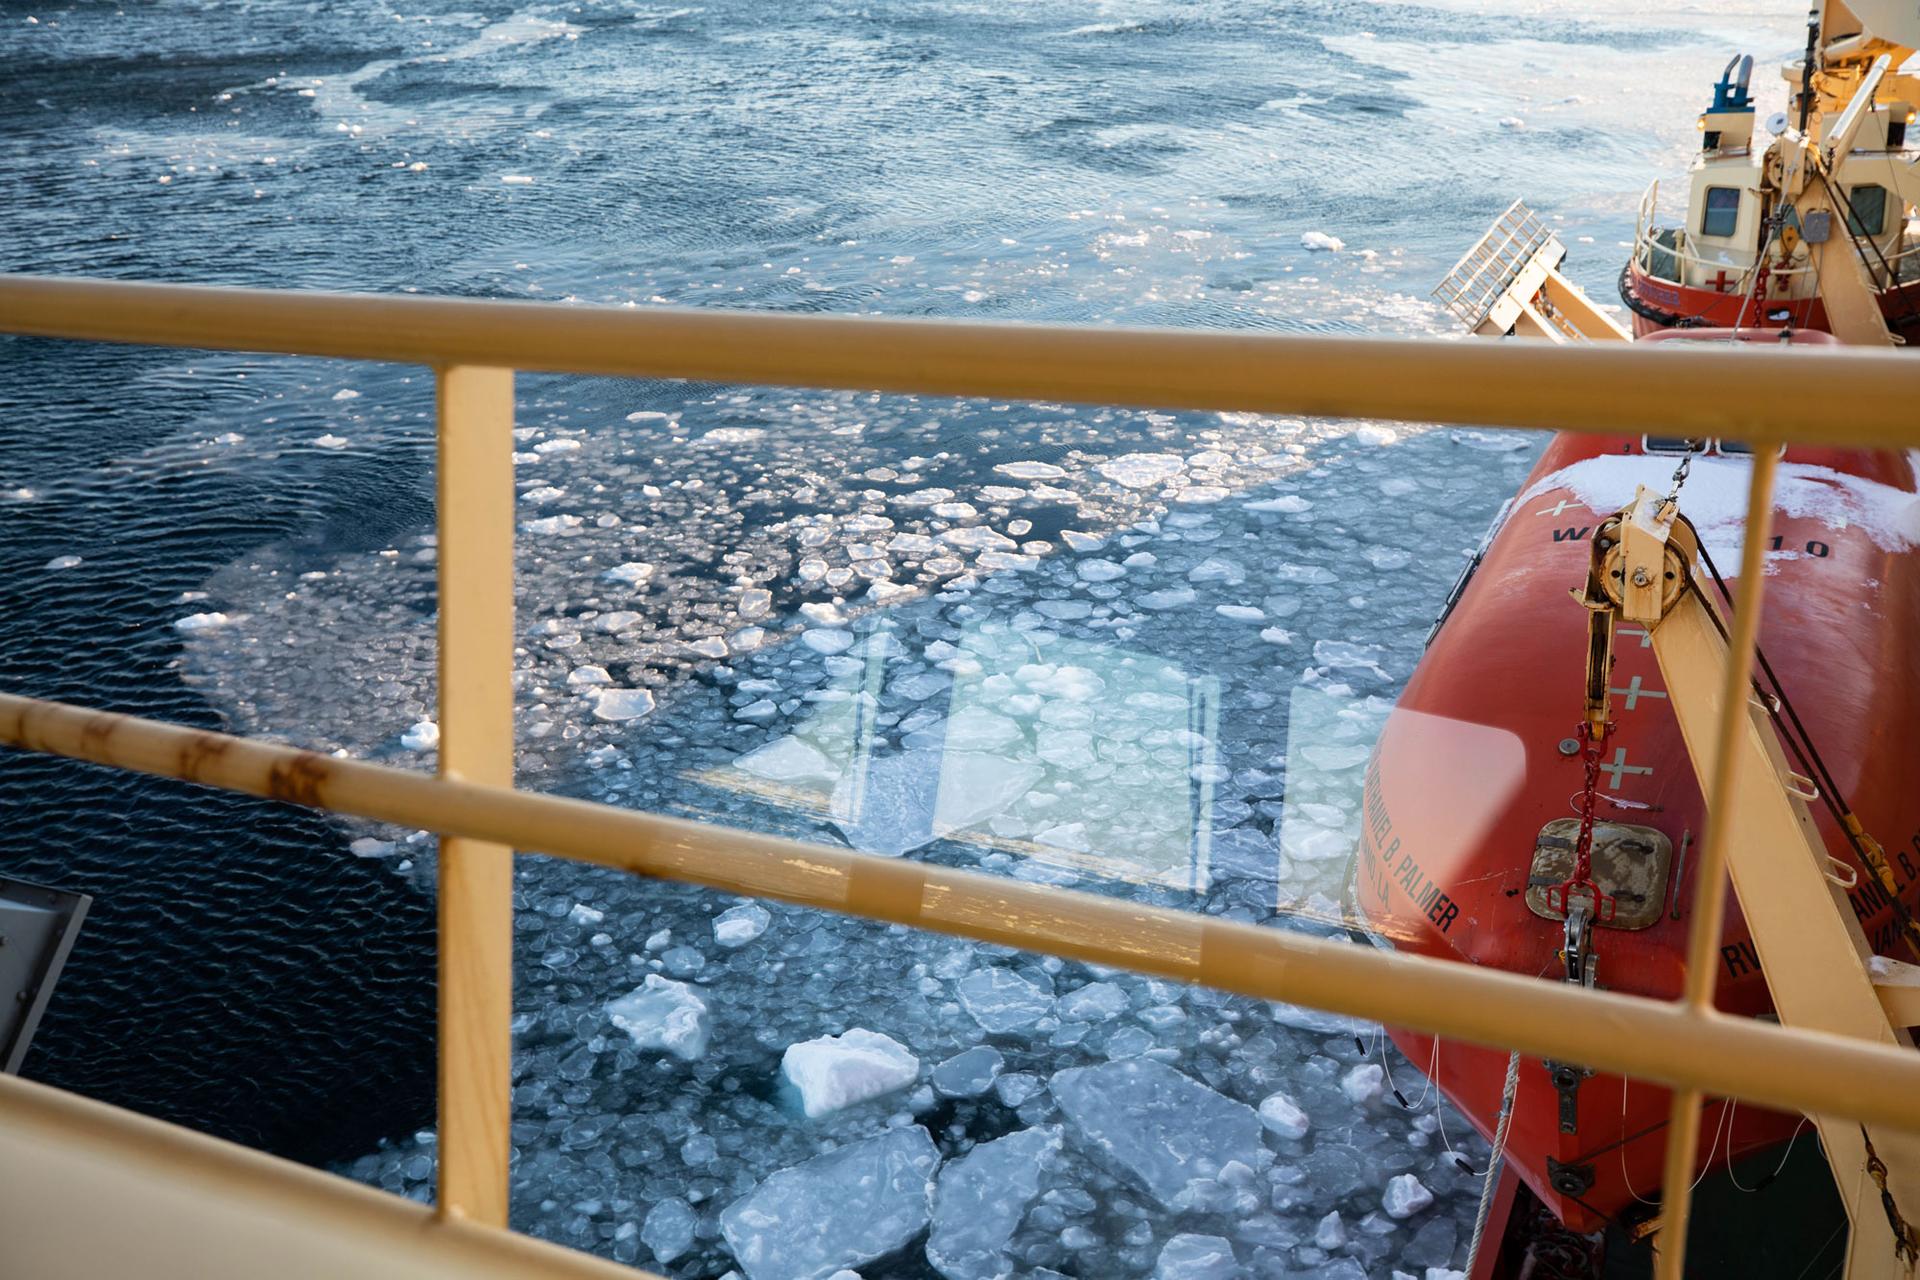 The yellow railing of the a research vessel is in the nearground with ice shown forming in the Amundsen Sea.